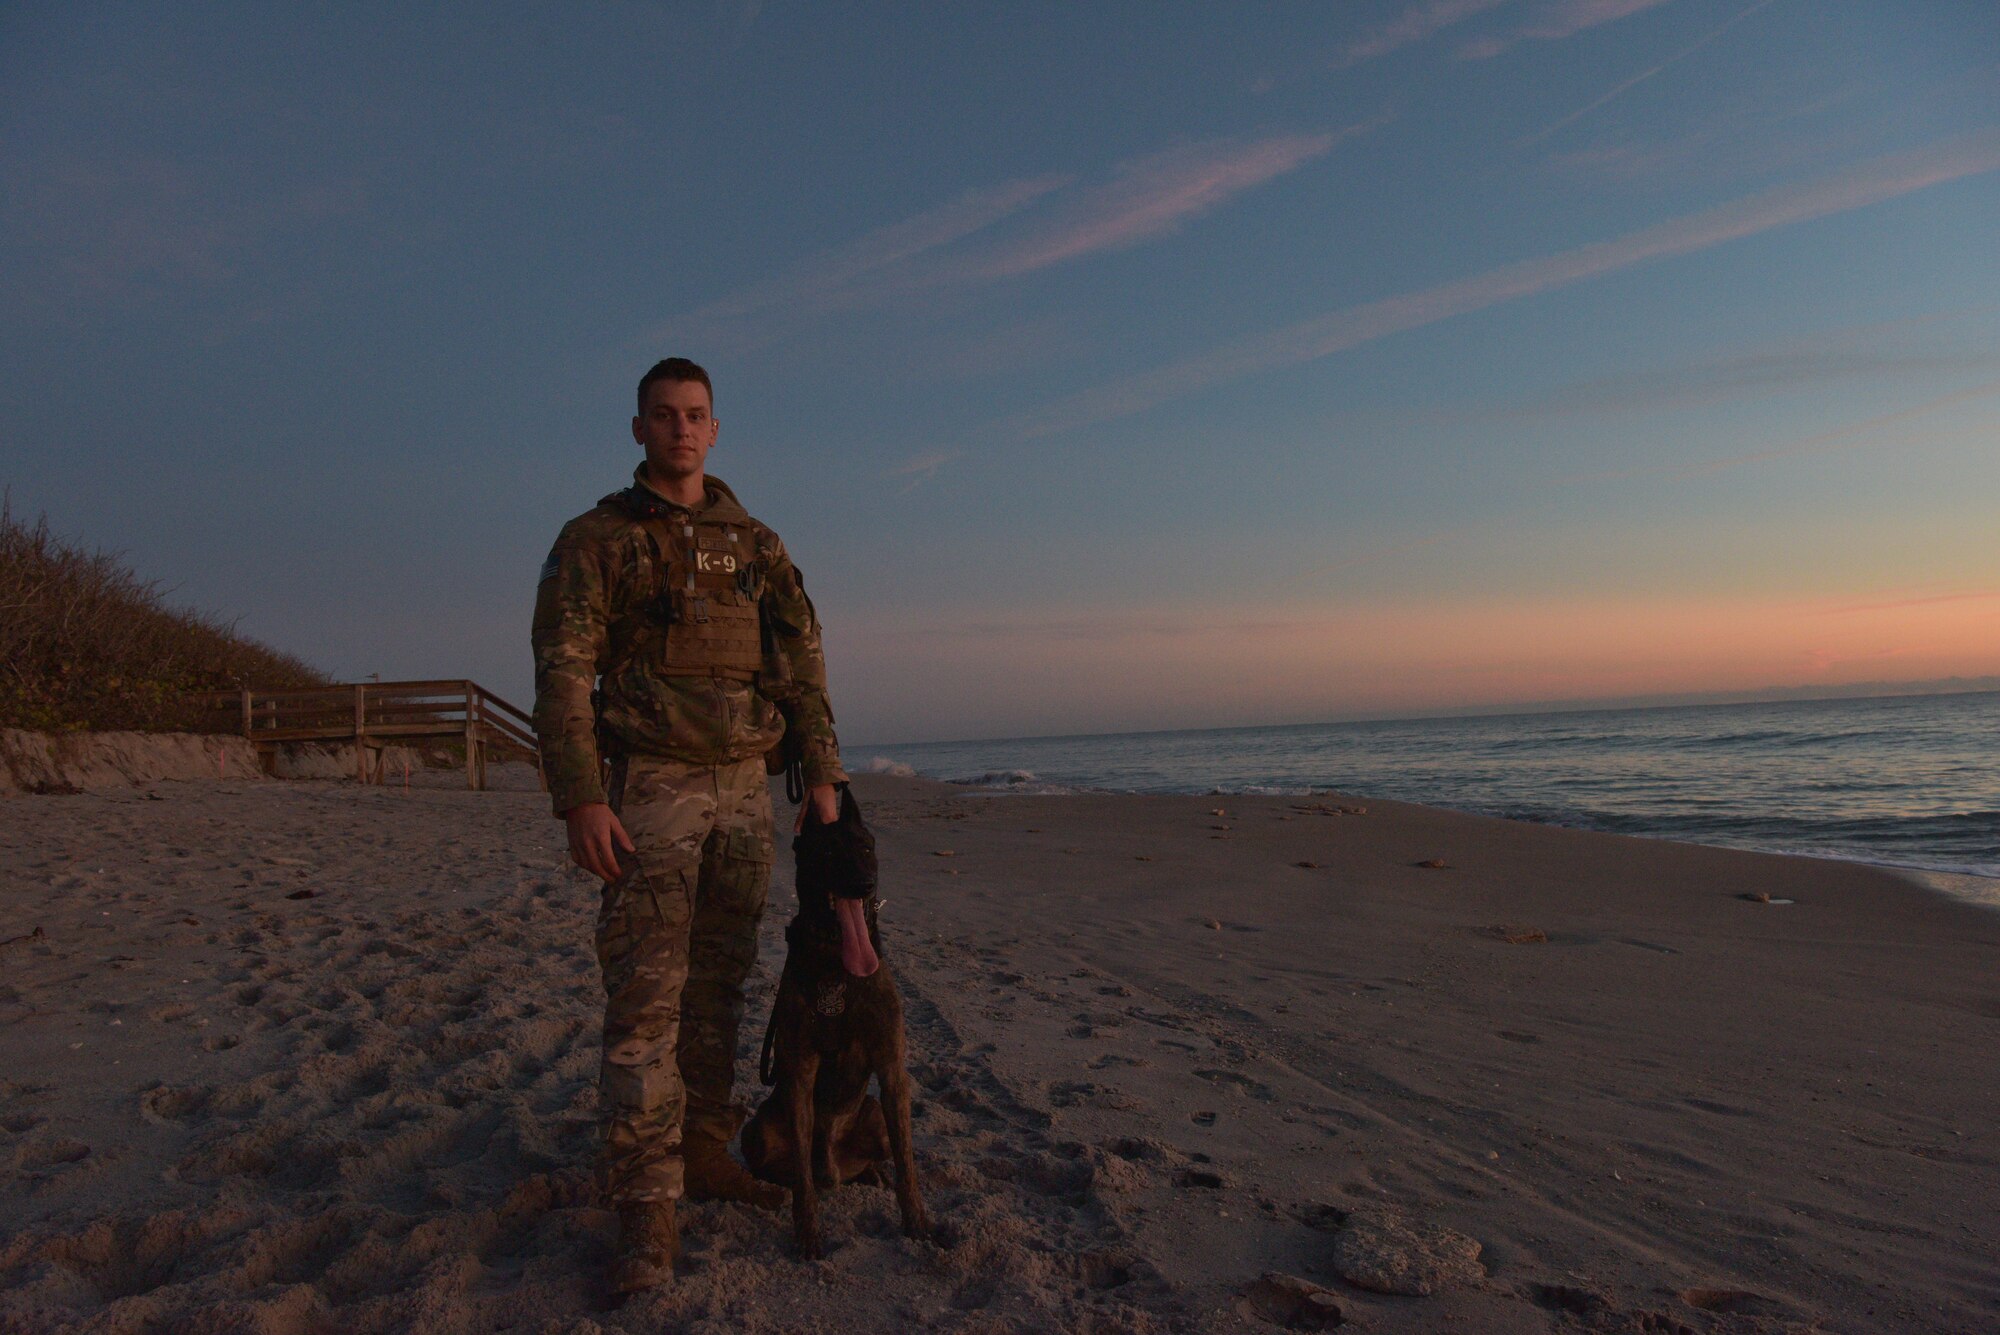 Staff Sgt. Kyle Pethtel, 45th Security Forces Squadron military working dog handler, poses for a photo with Pieter, his military working dog, at Patrick Air Force Base, Fla., Nov. 26, 2019. Pethtel and Pieter have been a MWD team since July 2019. (U.S. Air Force photo by Senior Airman Dalton Williams)